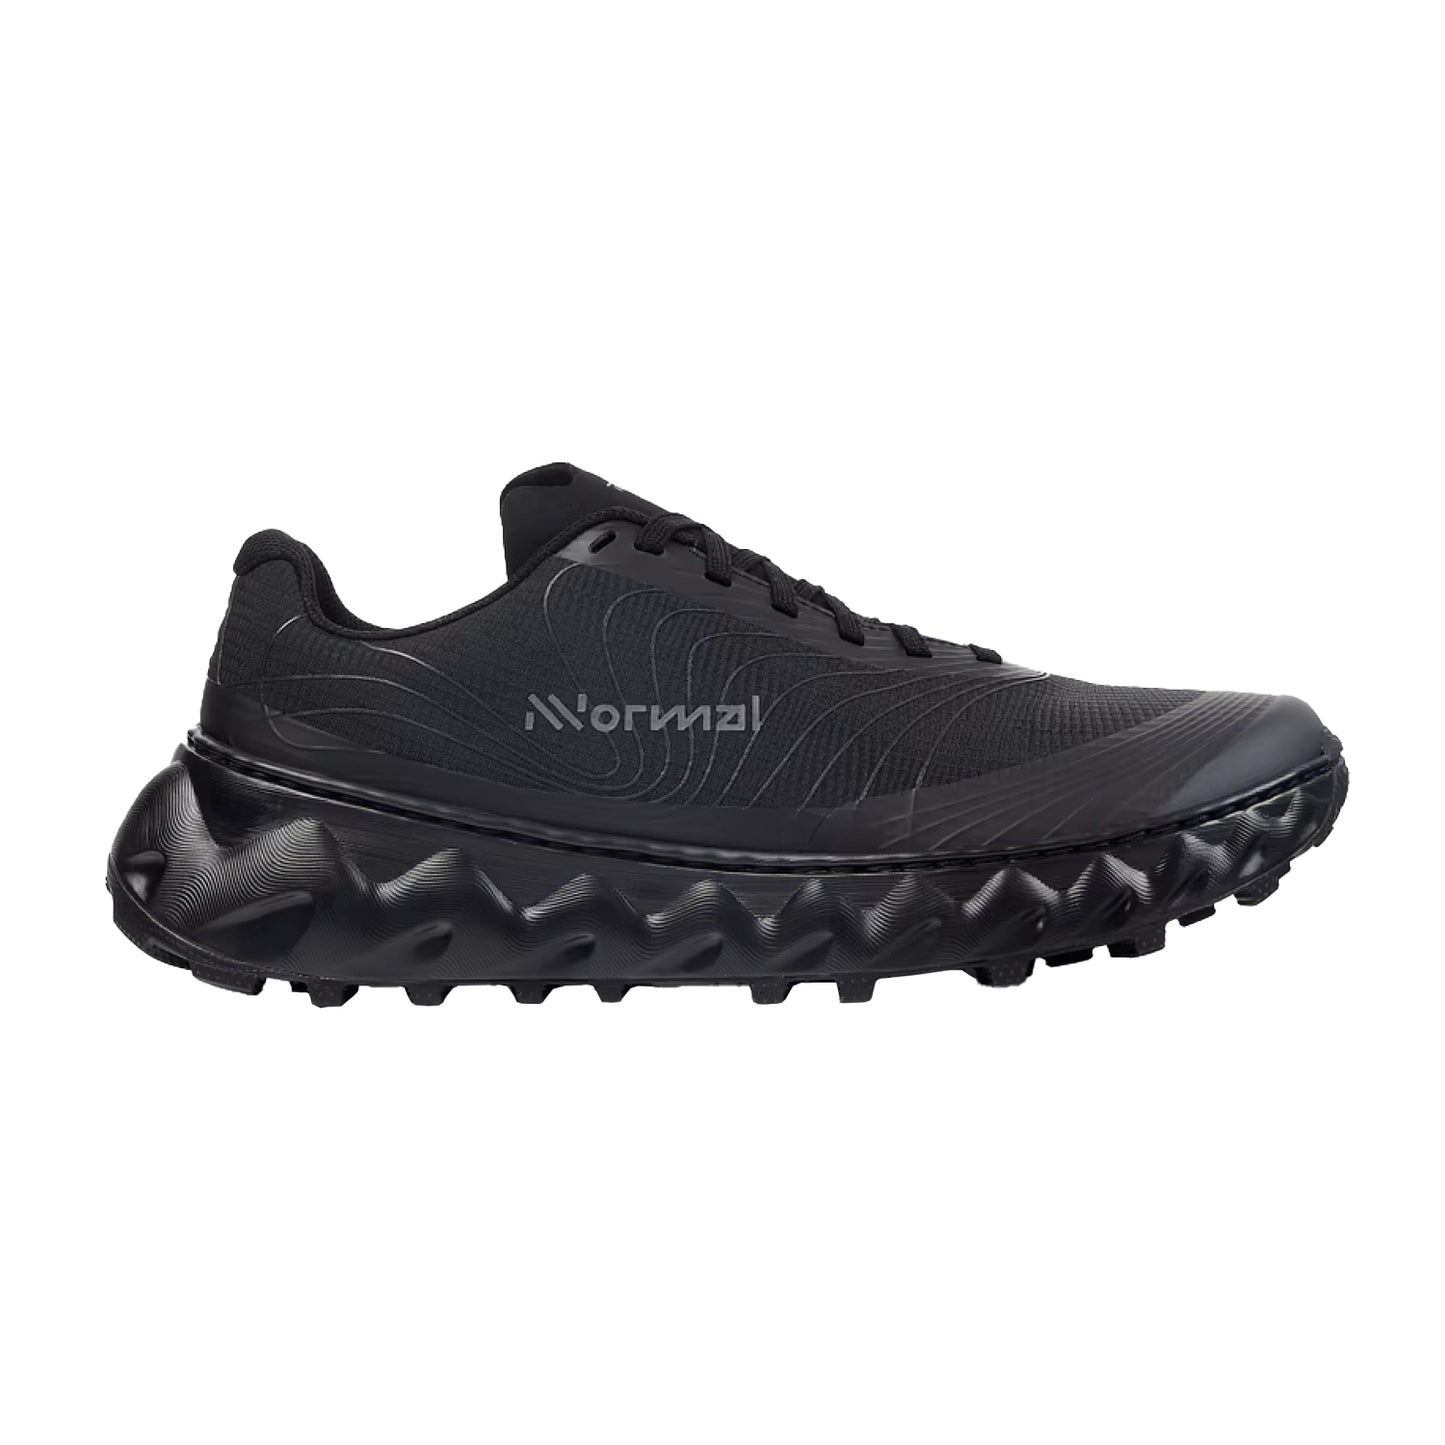 NNORMAL Tomir 2.0 Trail Shoes - Black